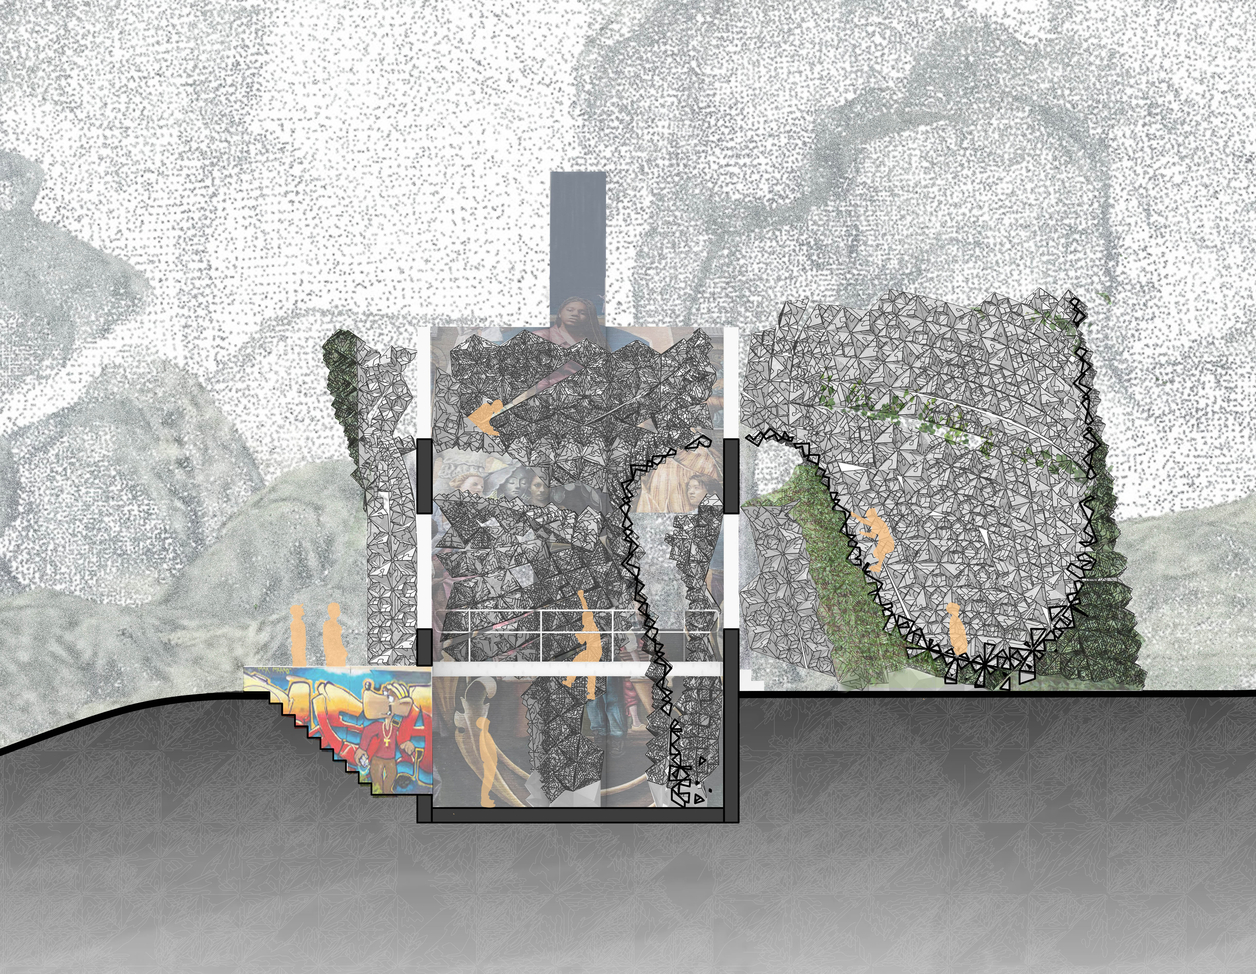 Section through proposed climbing gym of composed of carbon fiber modules sited within the shell of an abandon building.